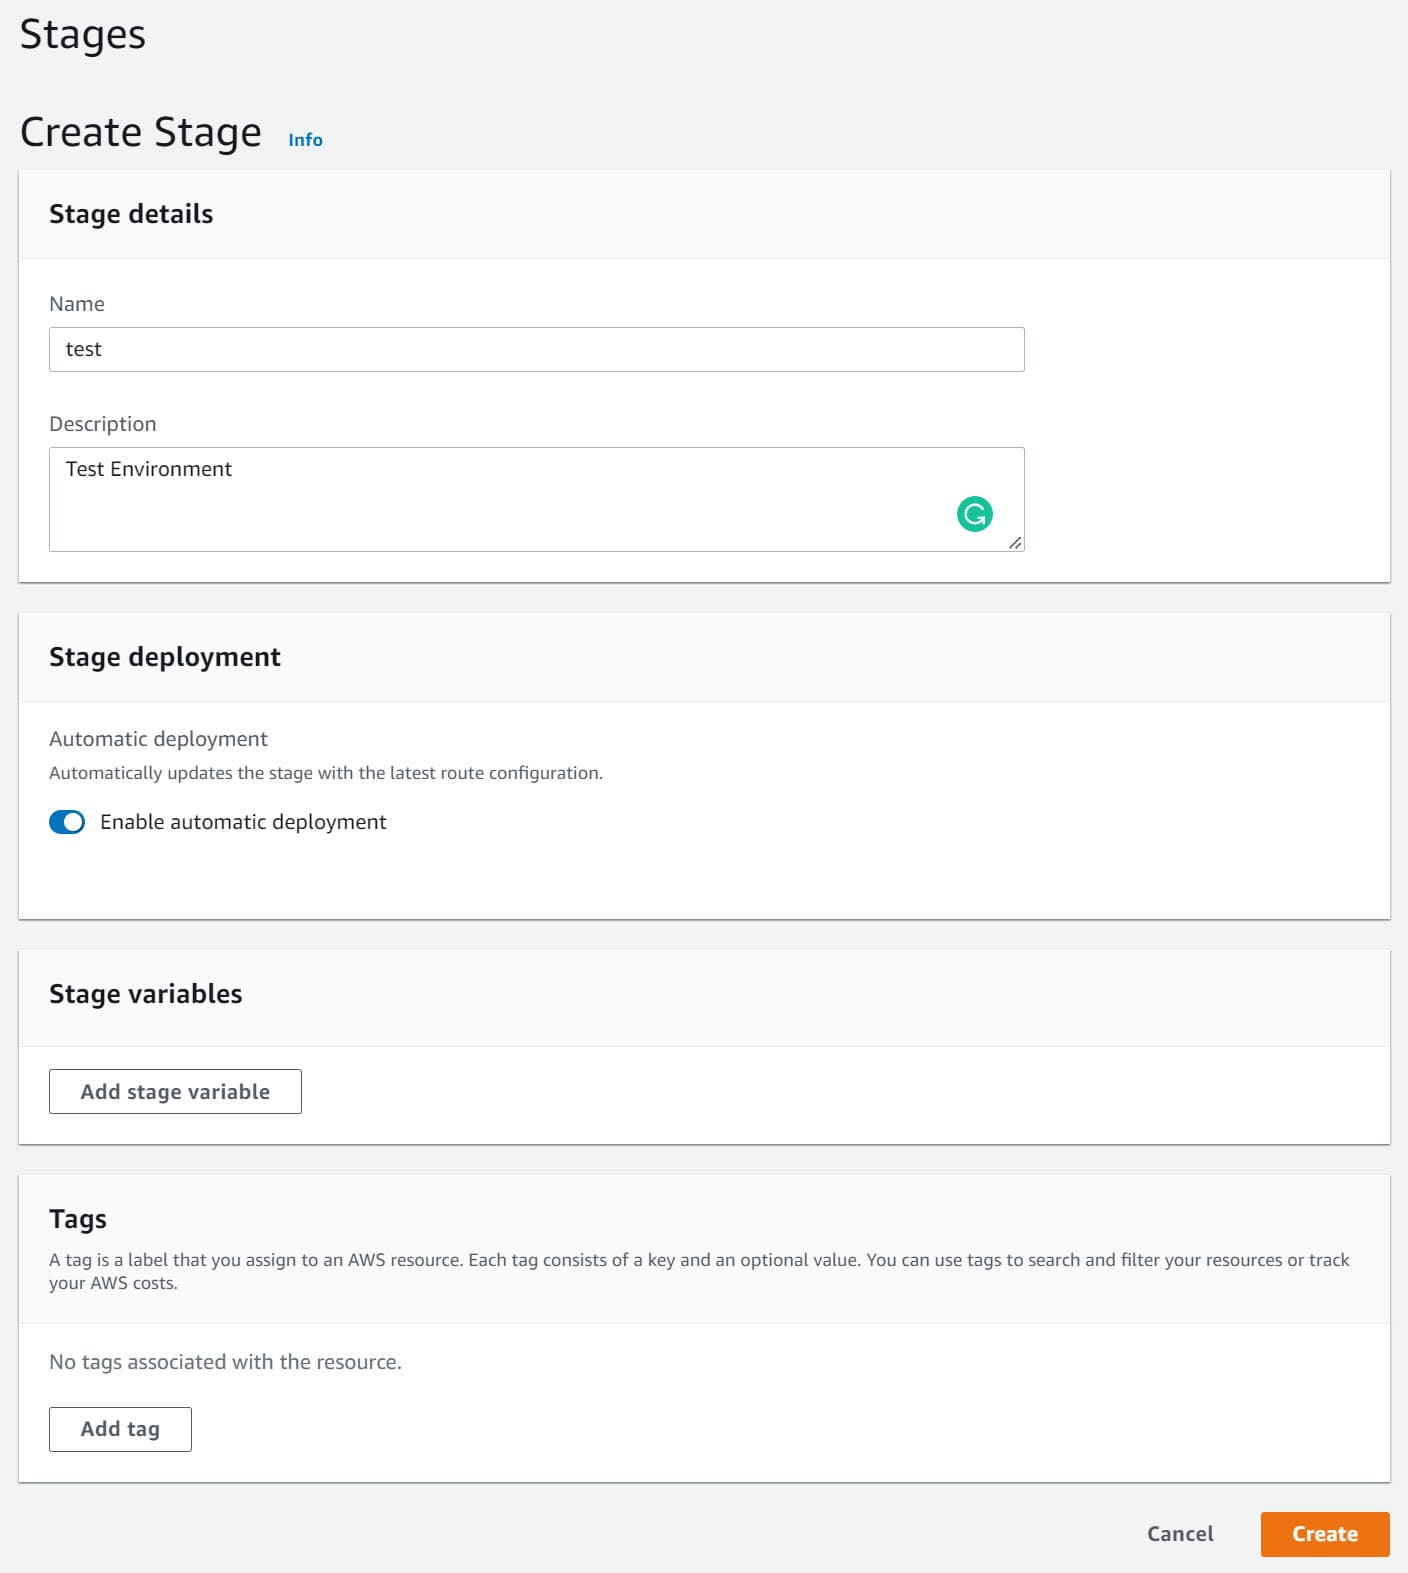 Create a new Stage in API Gateway